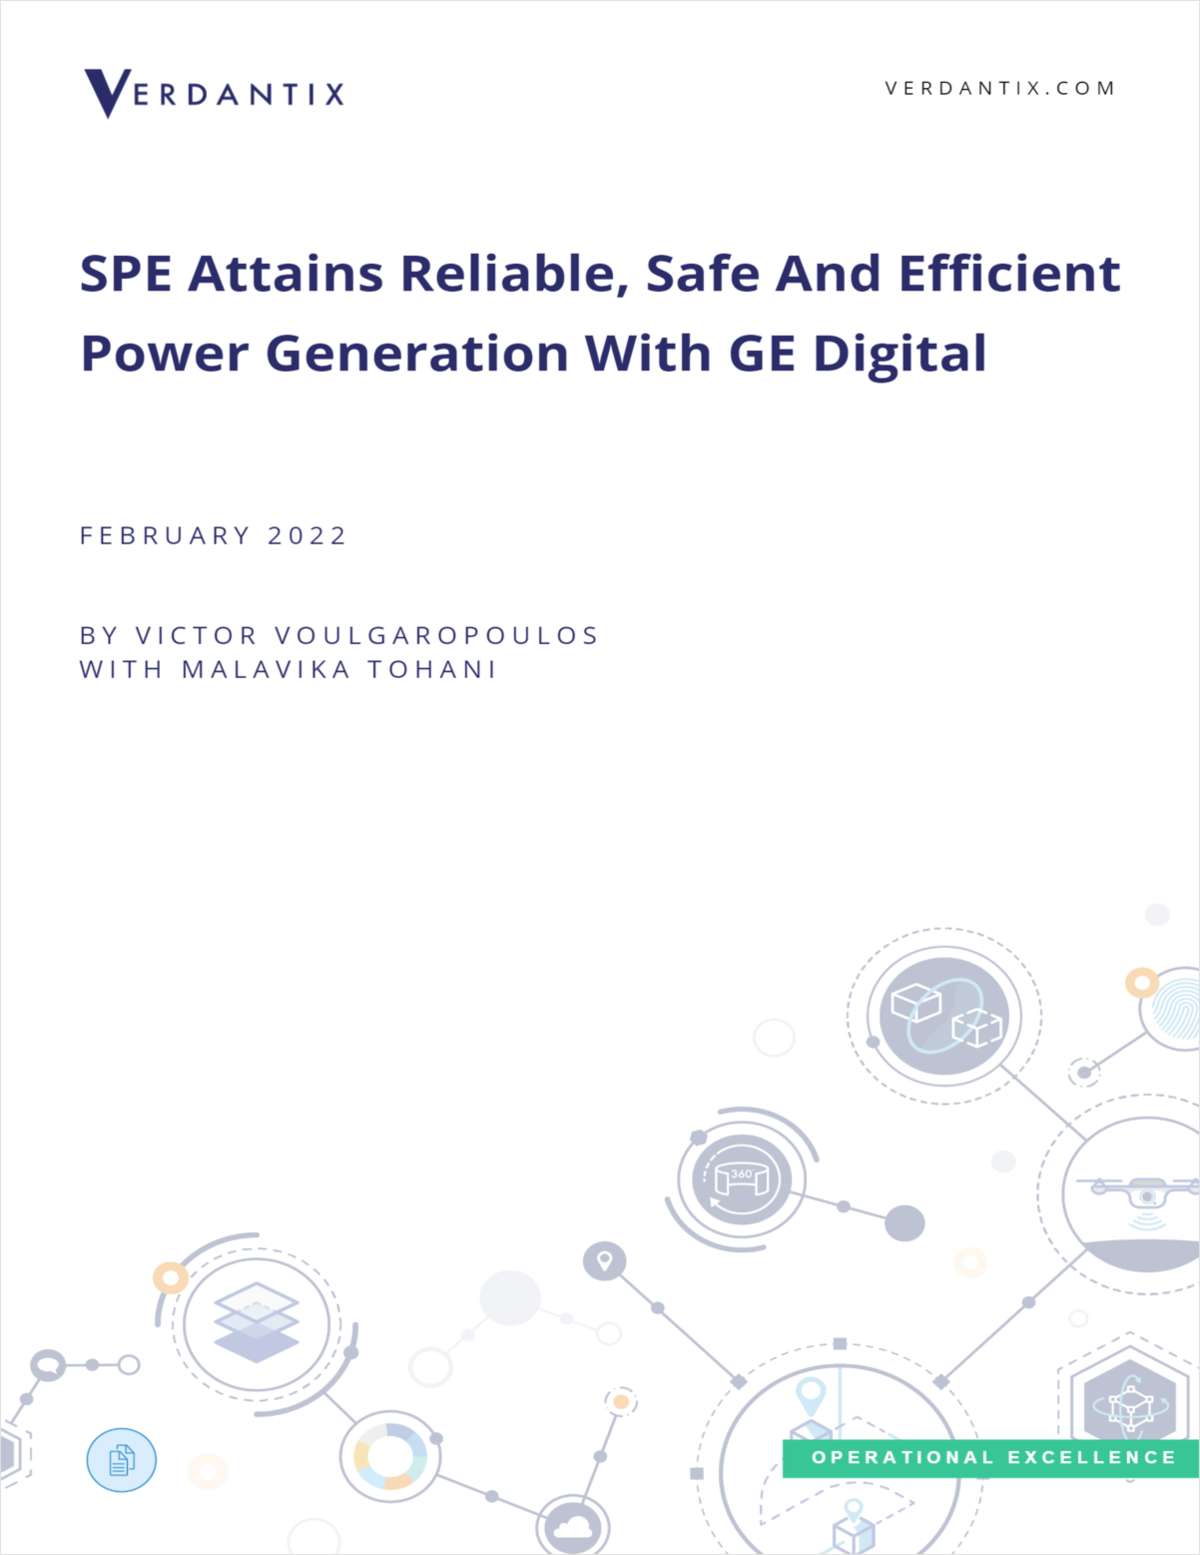 SPE Attains Reliable, Safe And Efficient Power Generation With GE Digital